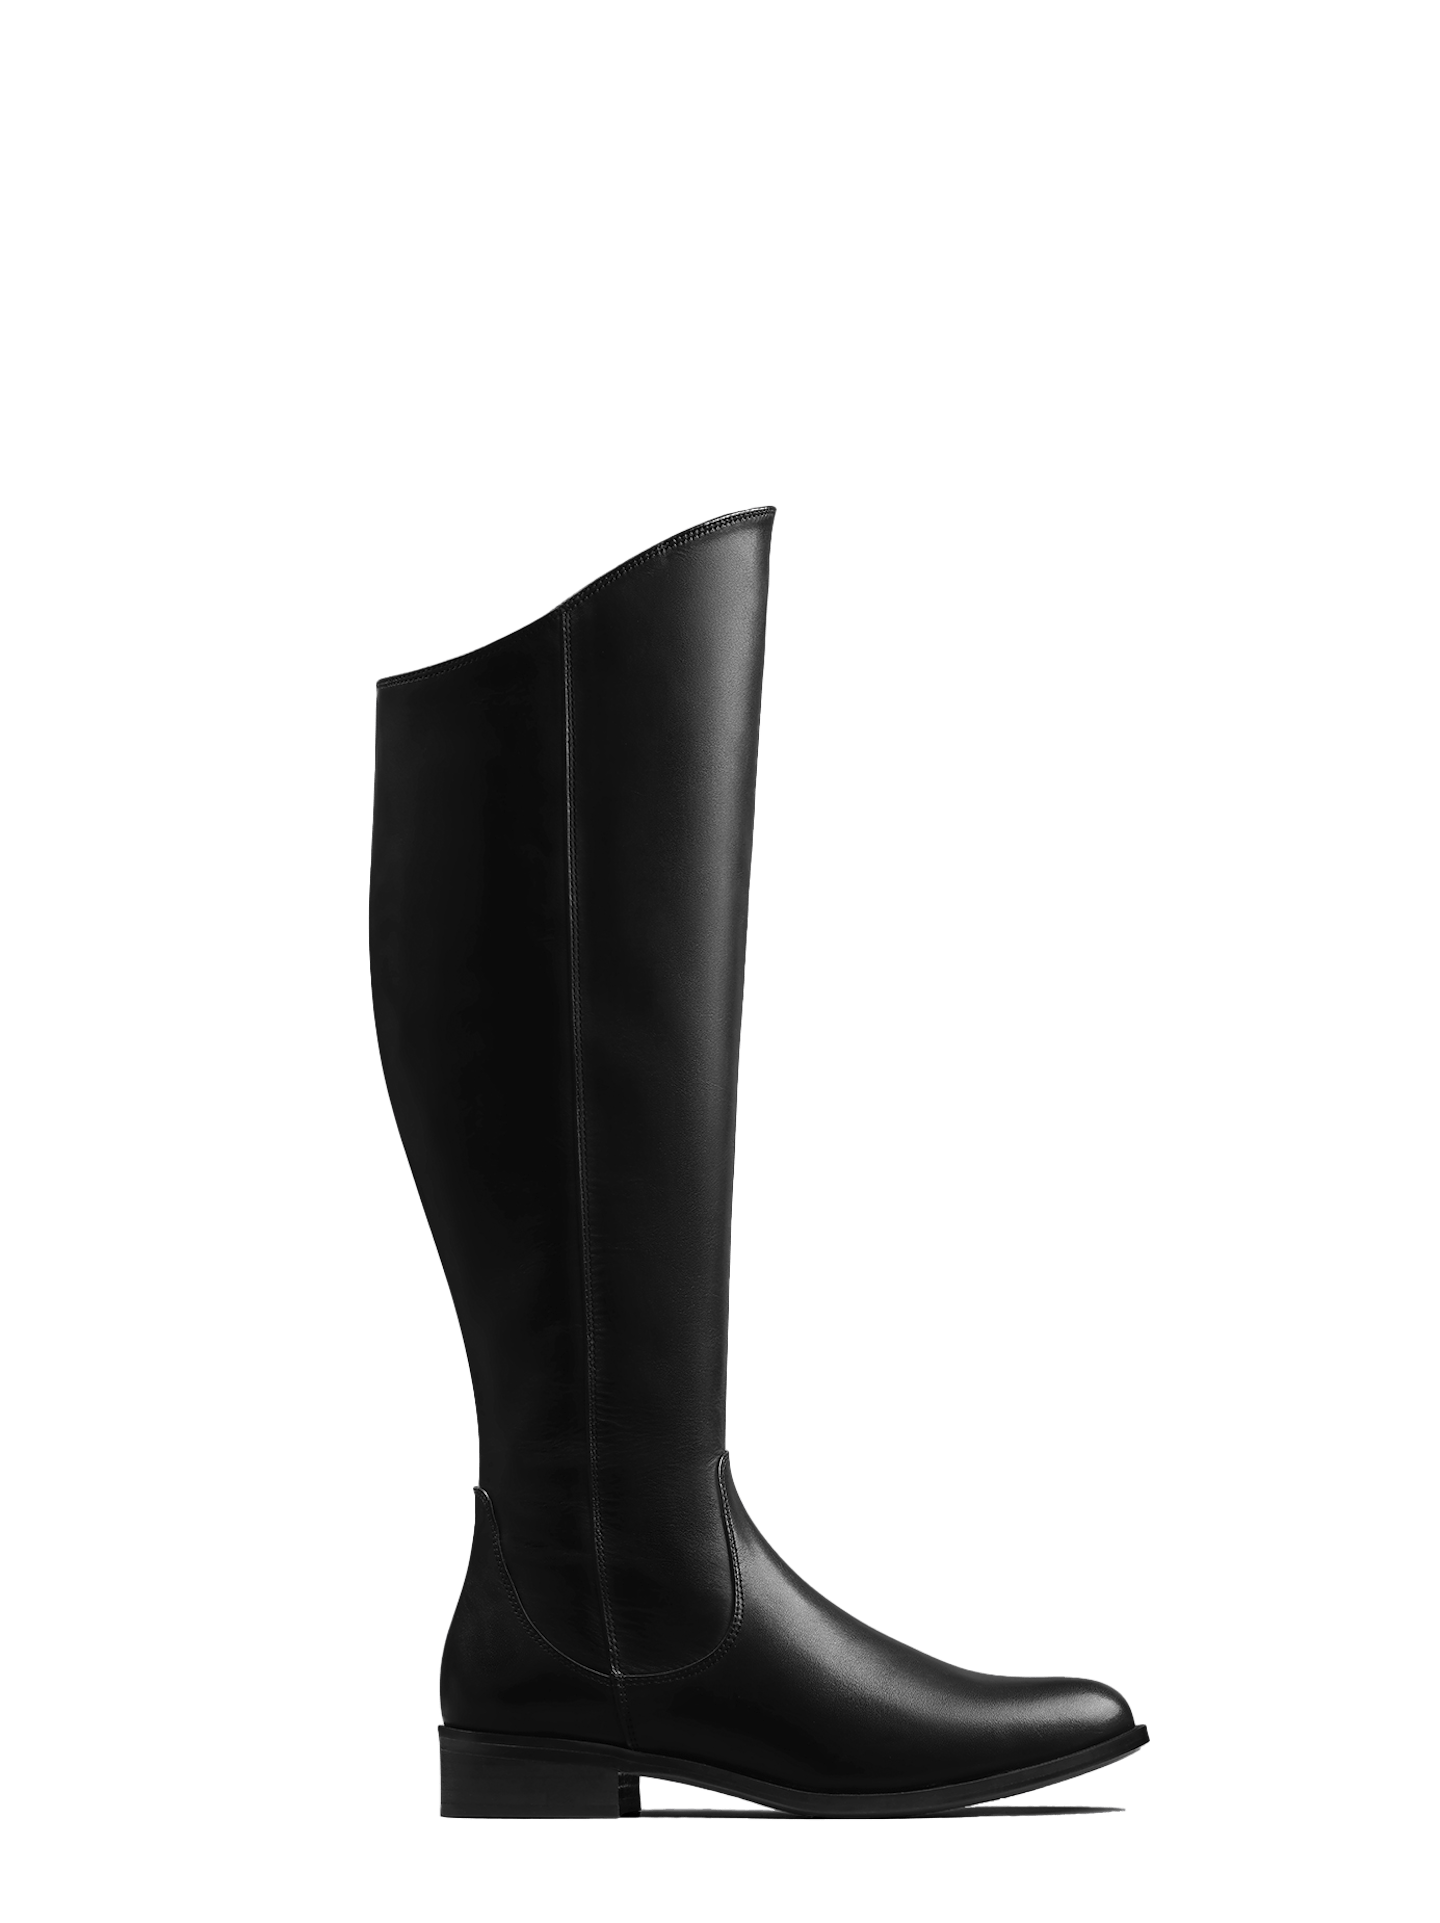 Why You Should Buy Toteme's Wide Shaft Boots Today